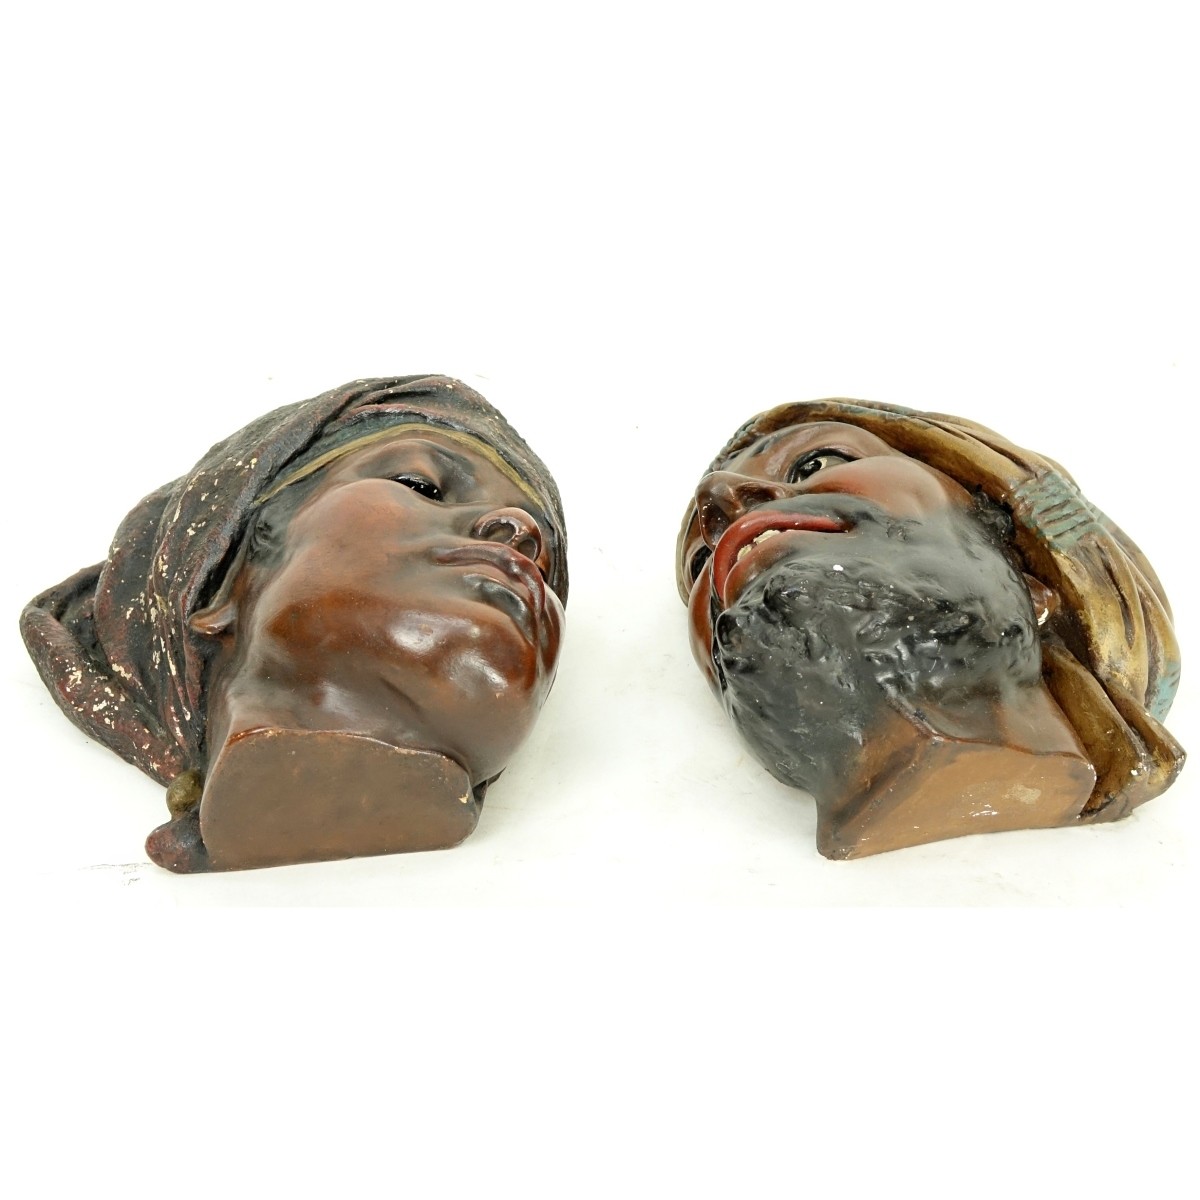 Pair of Vintage Polychrome Pottery Bedouin Figures